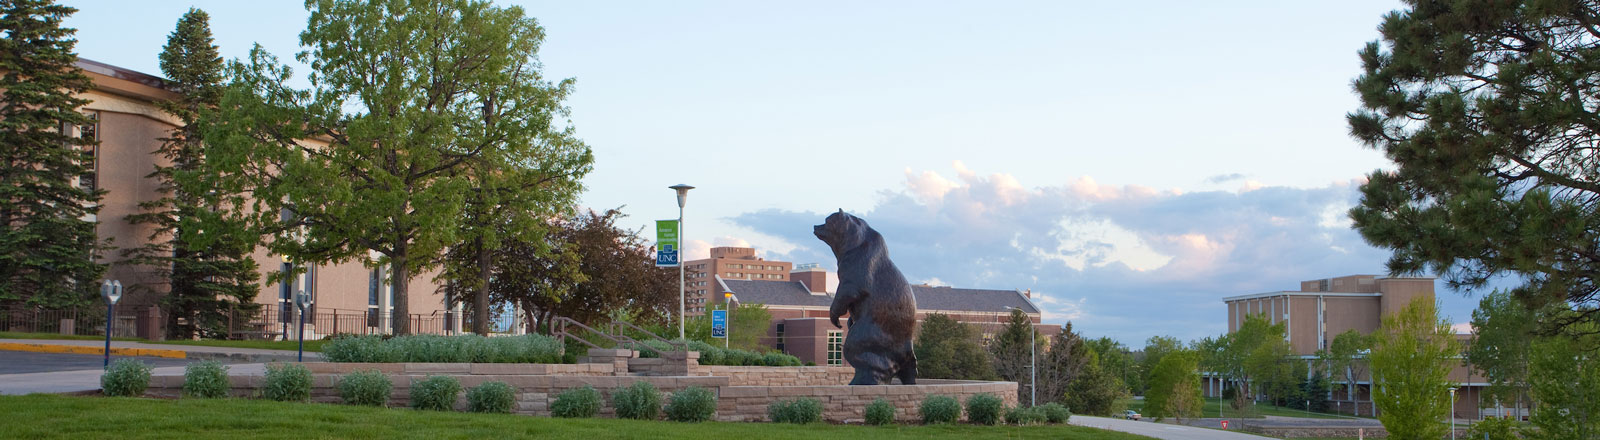 Bear Statue located outside the University Center